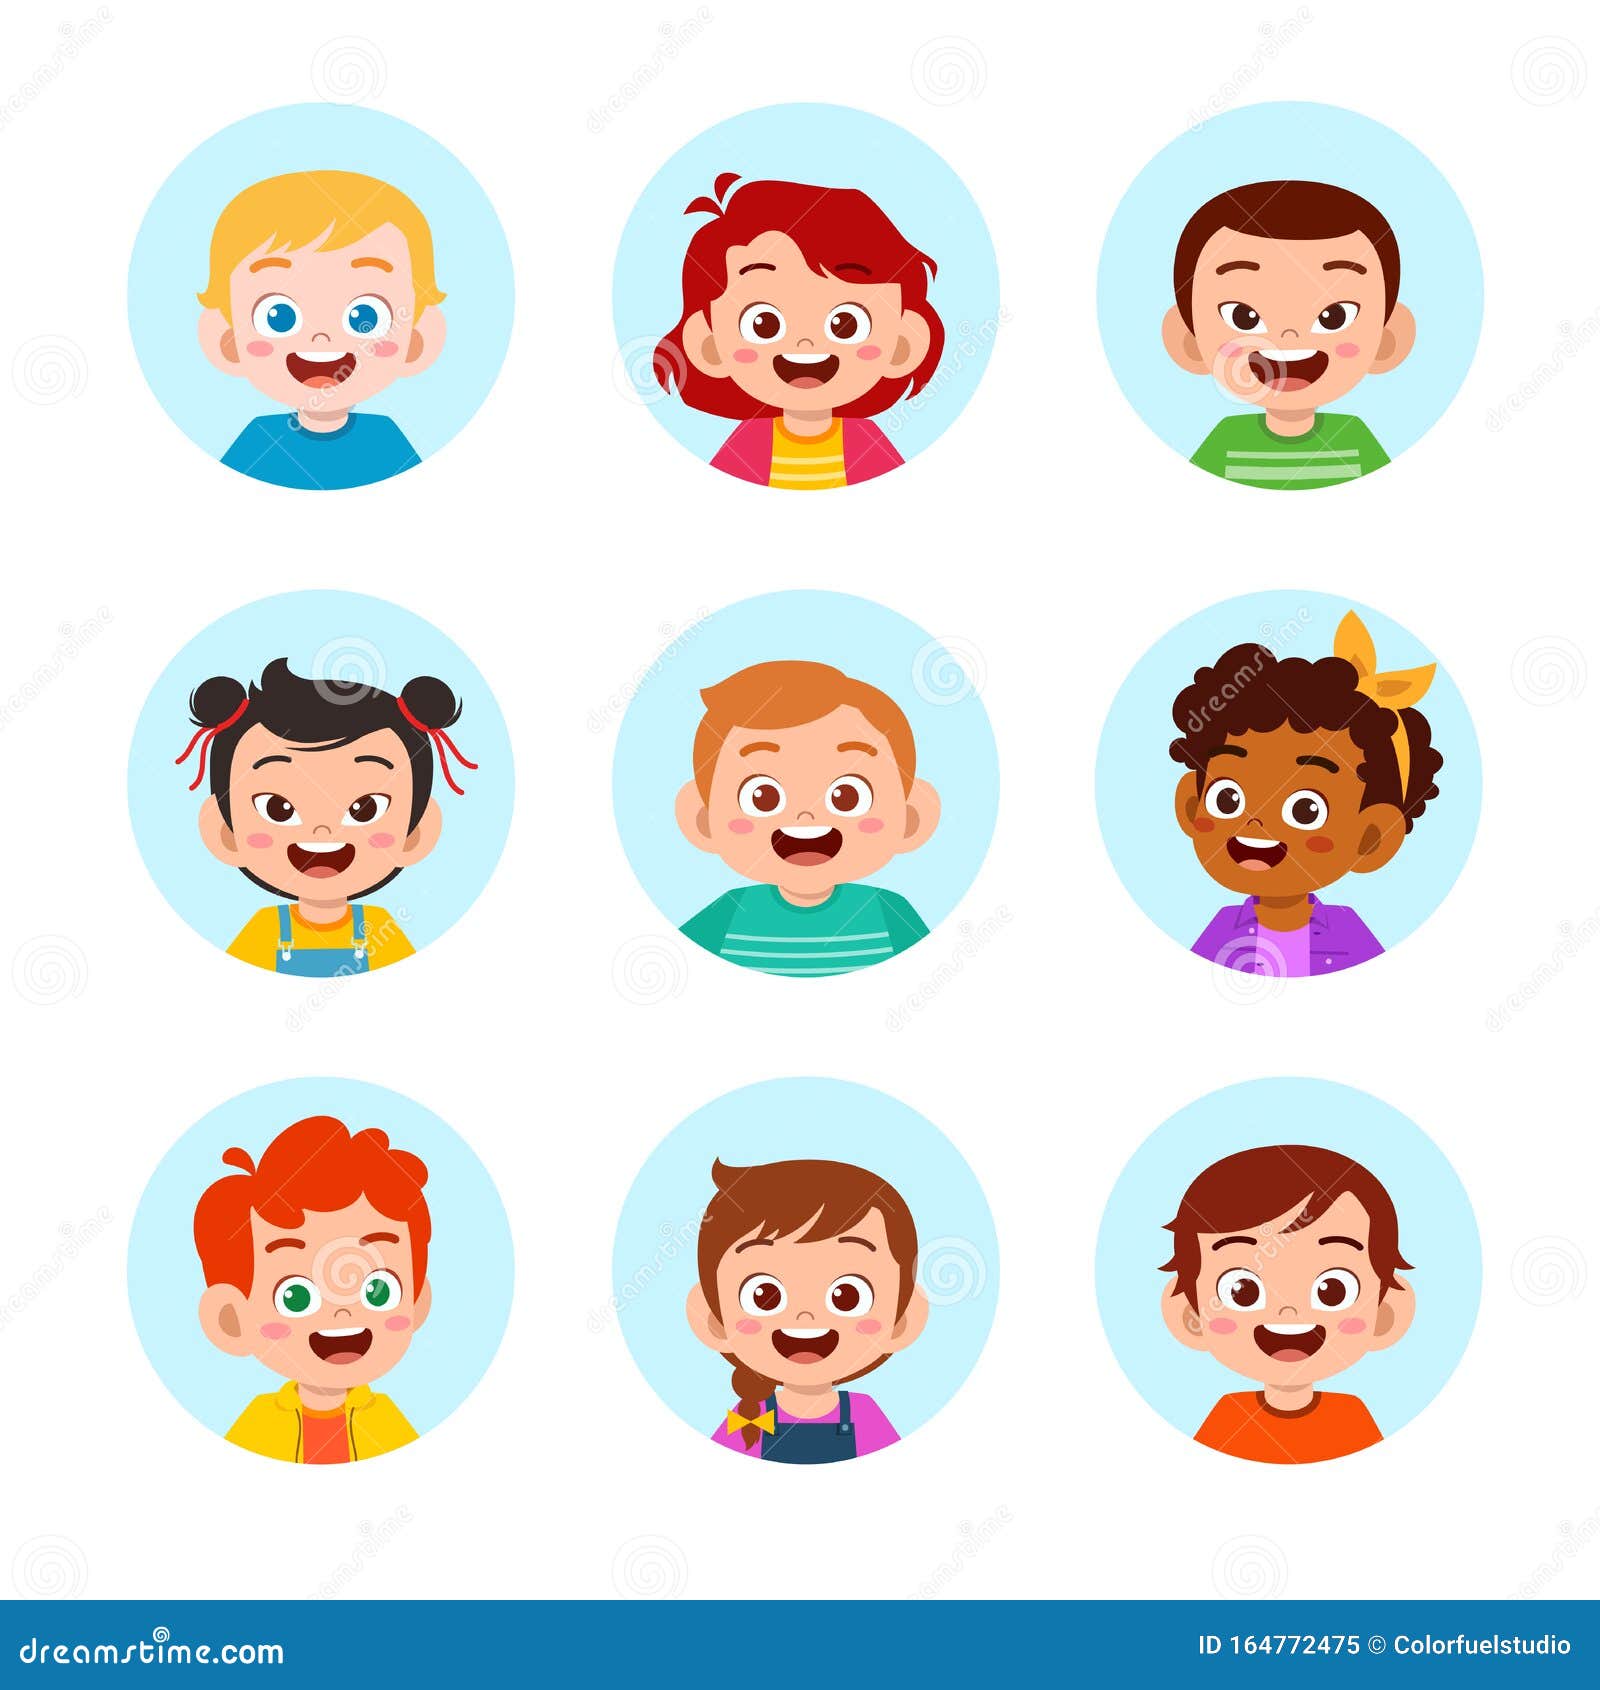 Child Avatar Vector Art Icons and Graphics for Free Download